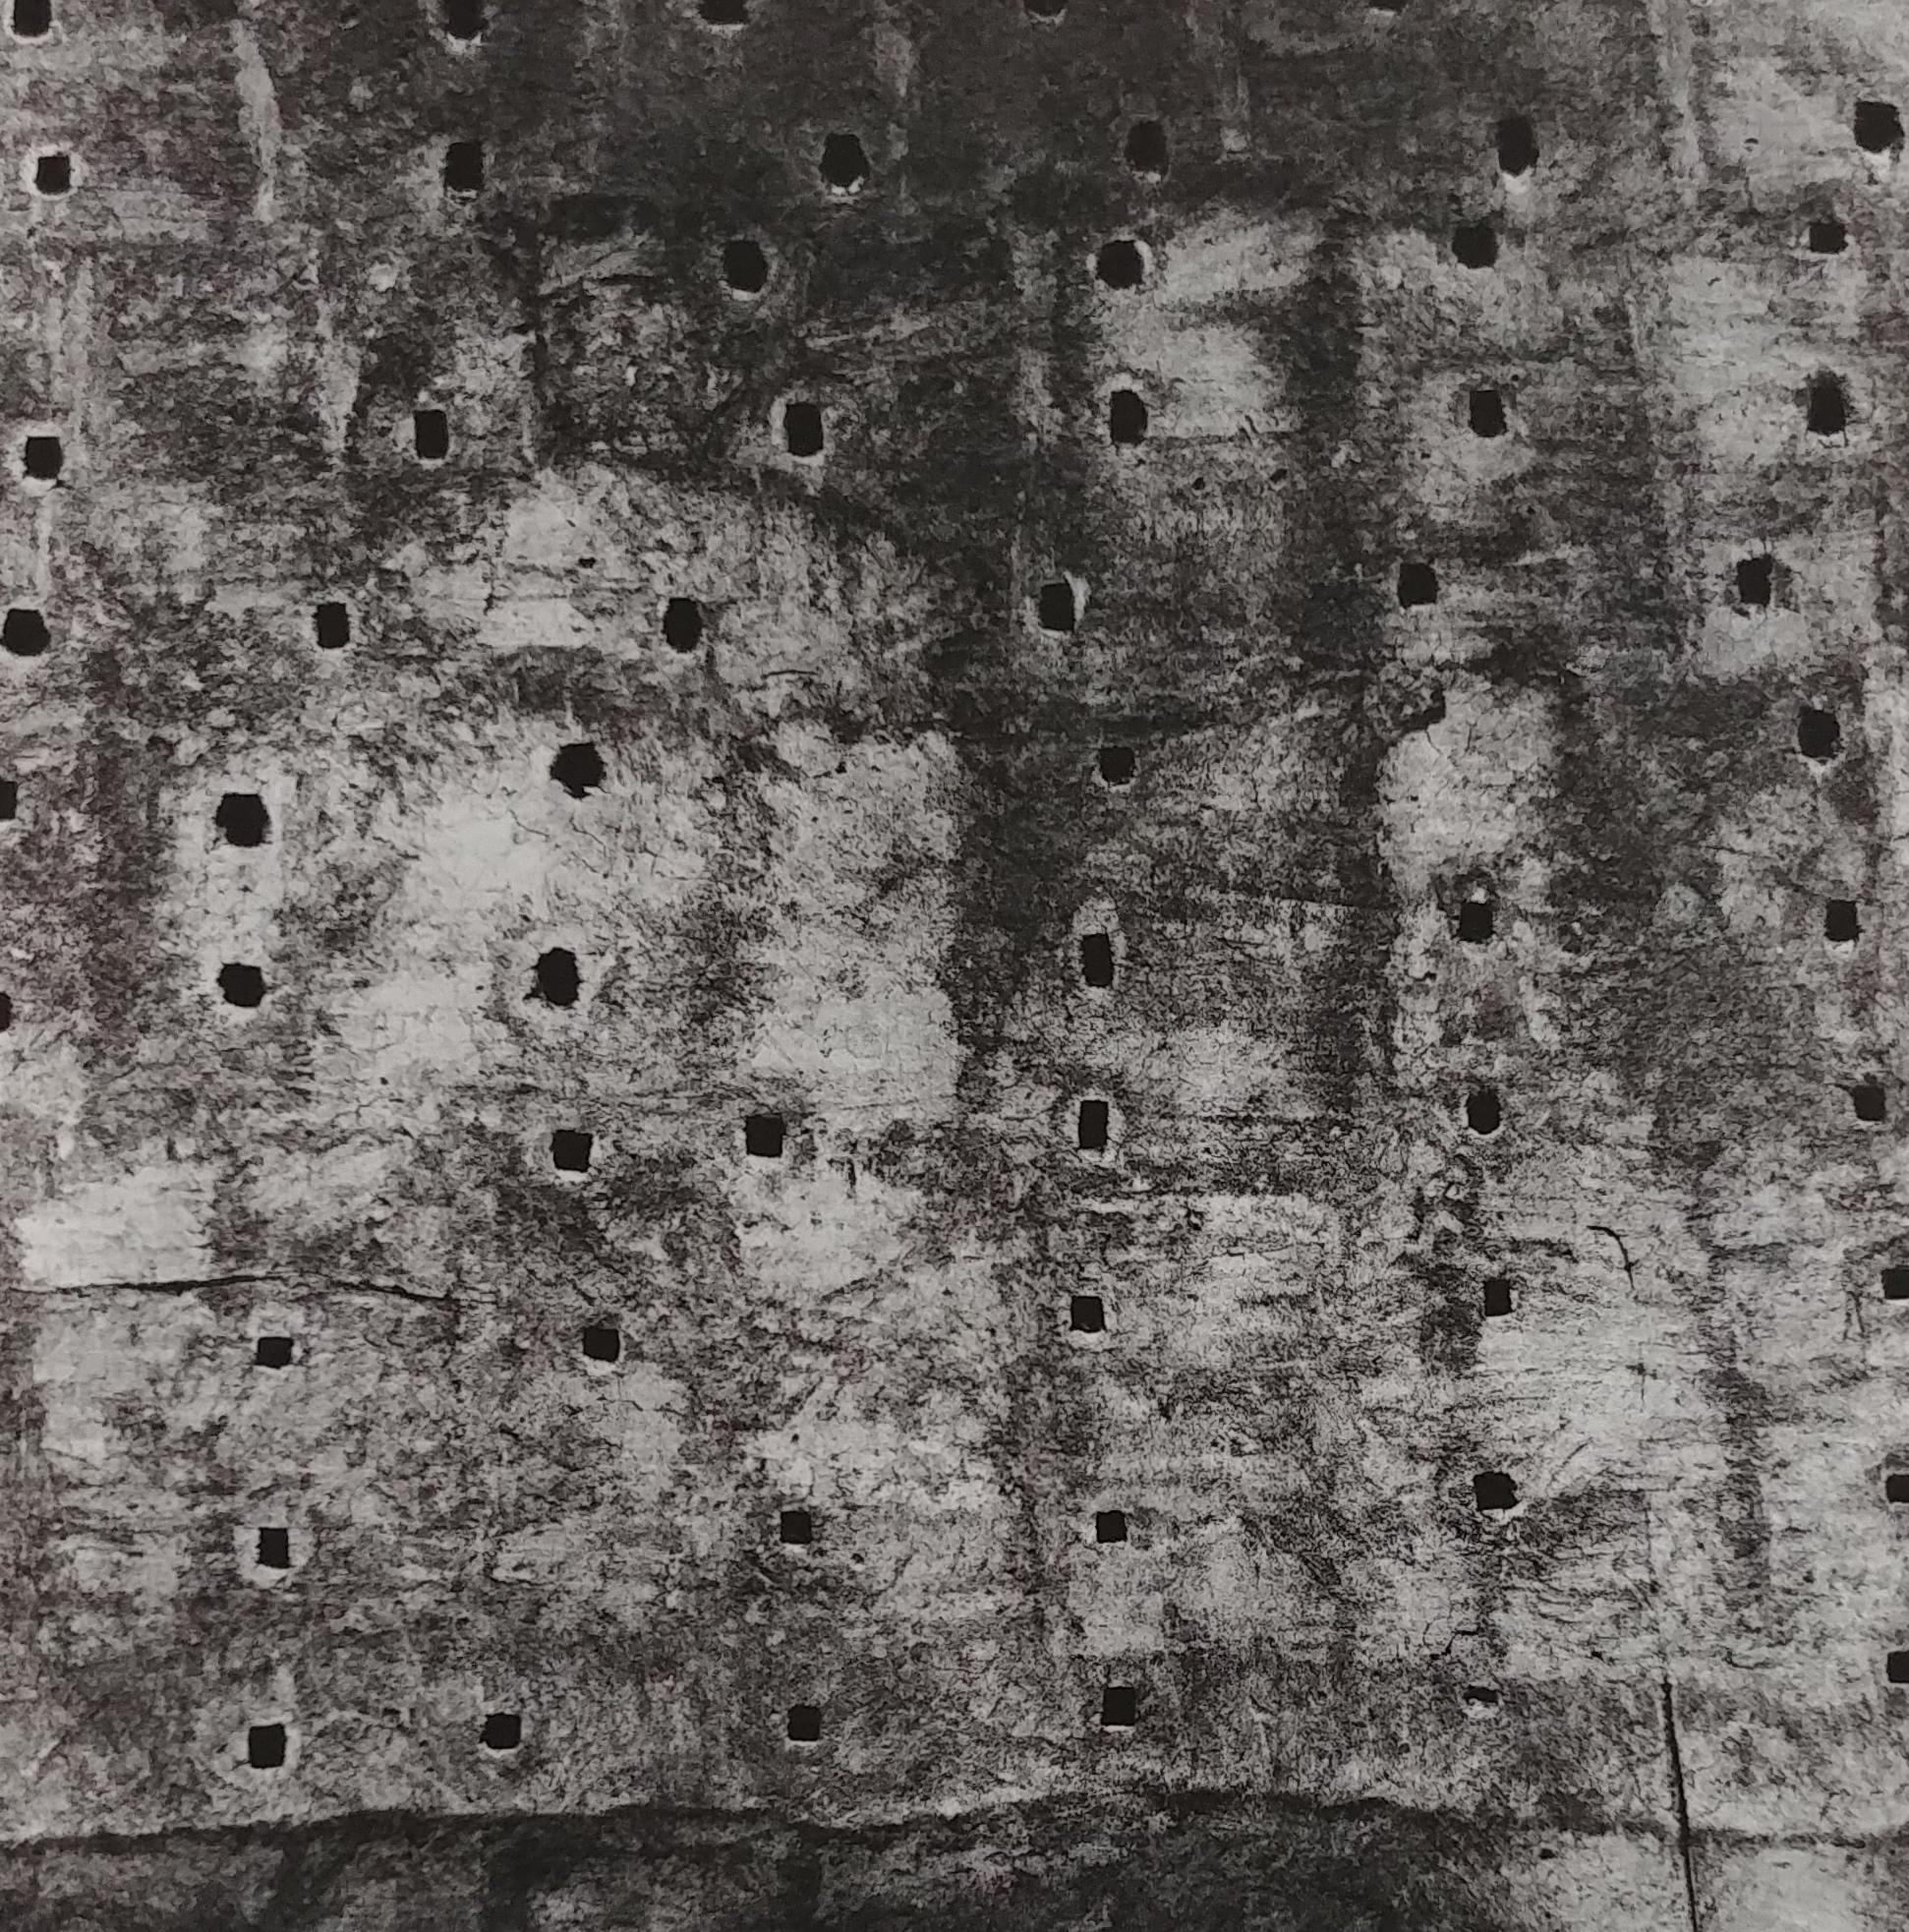 Morocco 93 by Aaron Siskind presents an abstract image, a close up of a textured rock slab. Small dark square holes scatter across the rock. The subject is cropped, emphasizing the textures of the material. 

Morocco 93 by Aaron Siskind is listed as